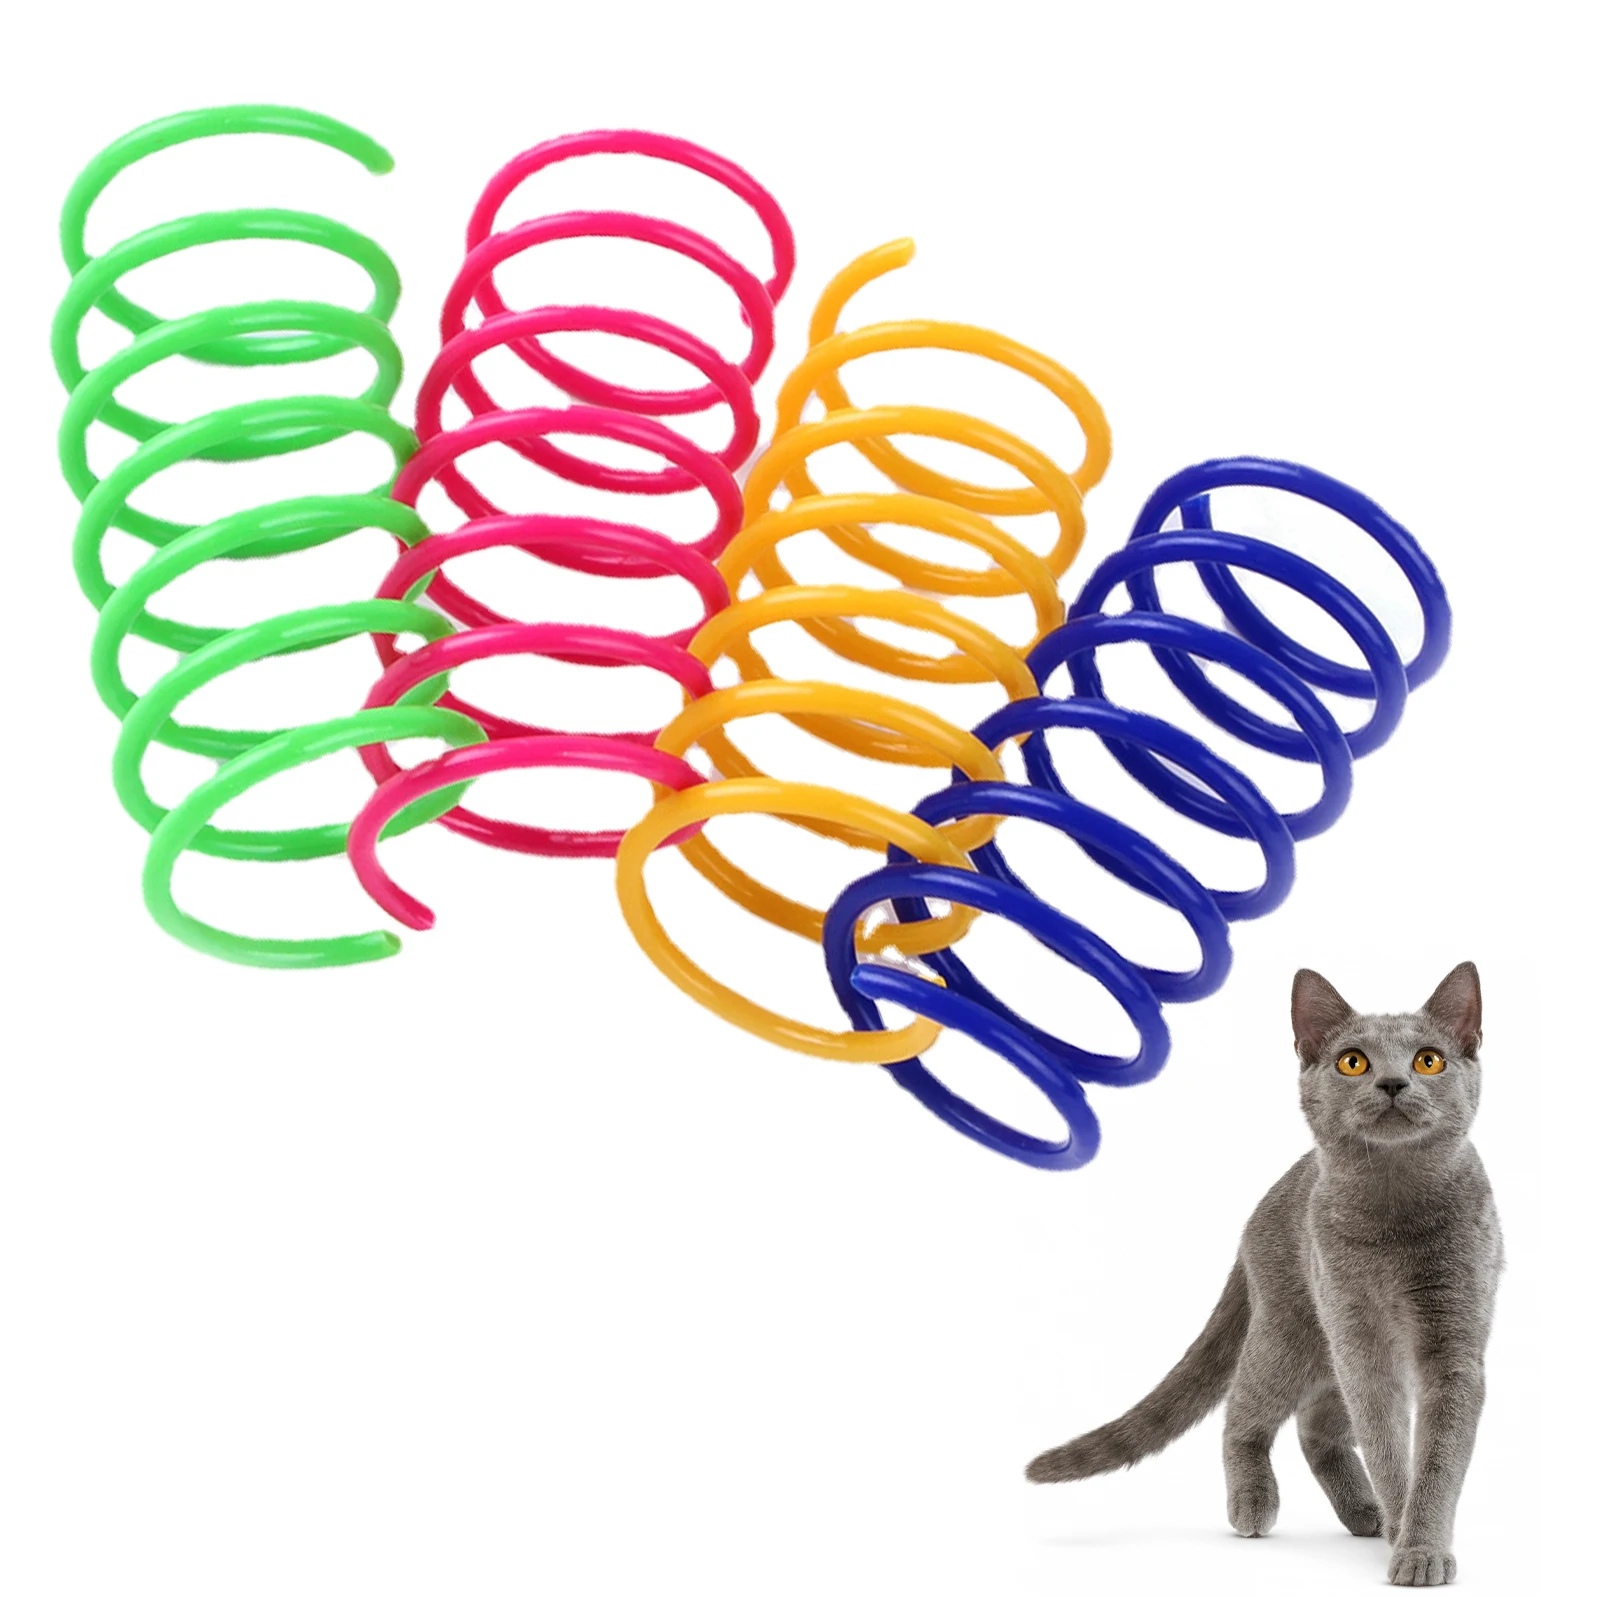 

Cat Spring Toy 4PCS Kitten Springs Coil Indoor Cat Toys Colorful Coil Spiral Springs Pet Action Wide Durable Interactive Toys